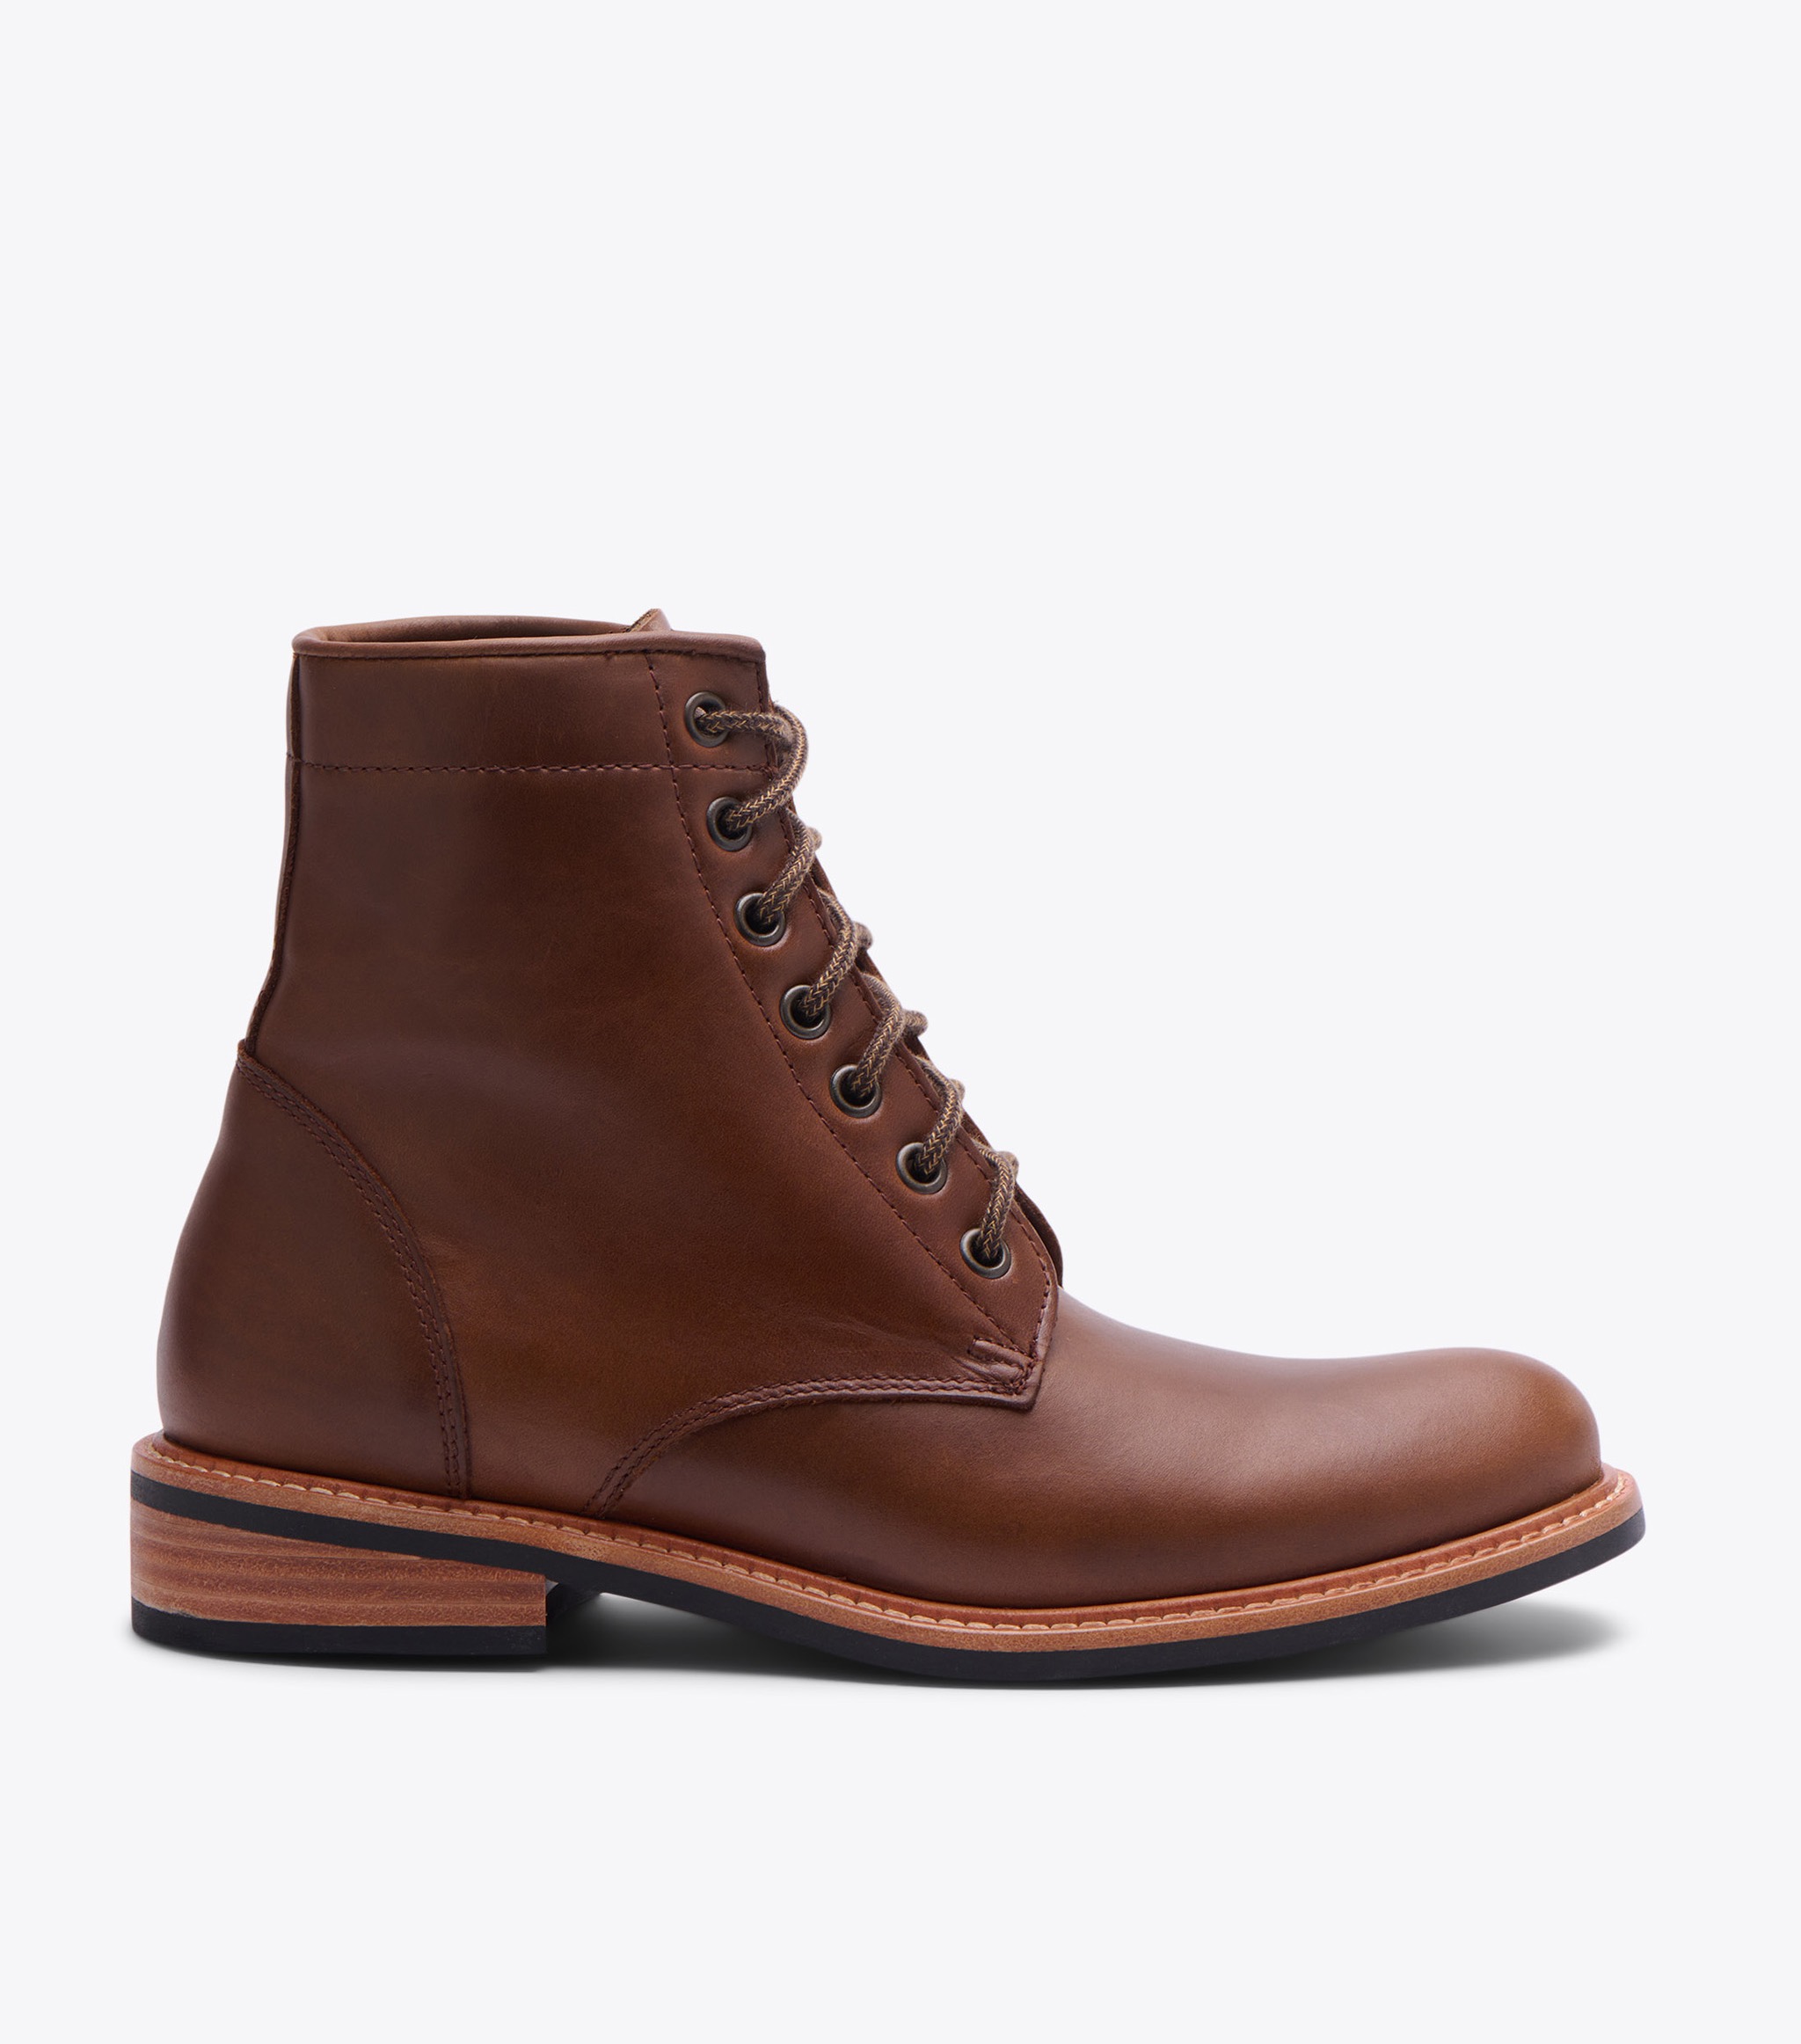 Nisolo All-Weather Amalia Boot Brown - Every Nisolo product is built on the foundation of comfort, function, and design. 